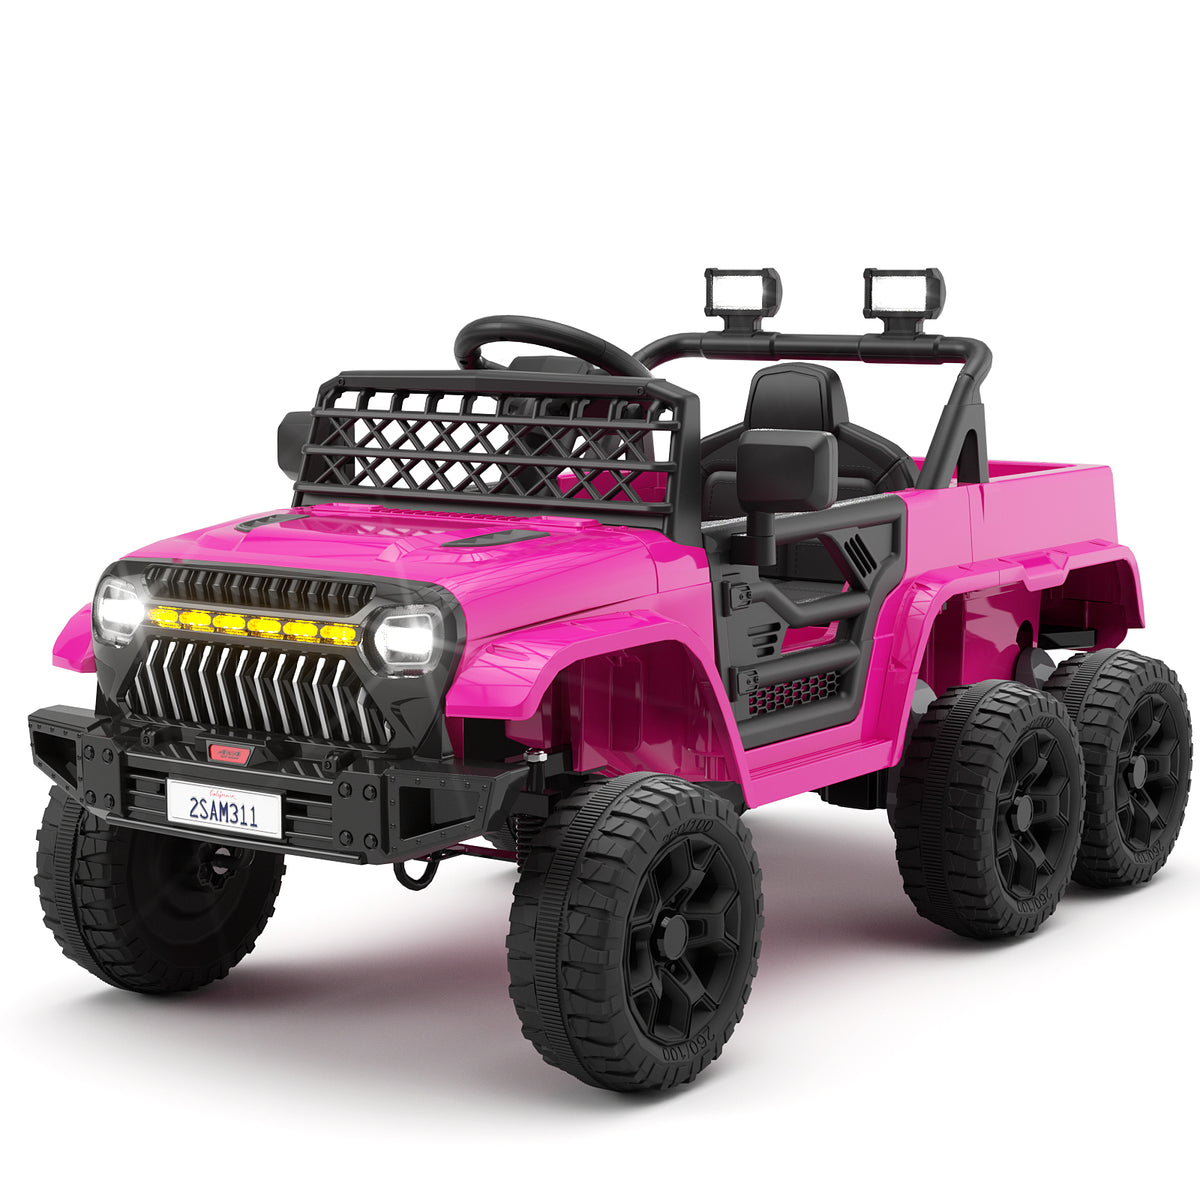 XJD 12V 7AH Ride On Truck Car with Remote Control, 6 Wheels, 2 Seats, Power Car for Kids